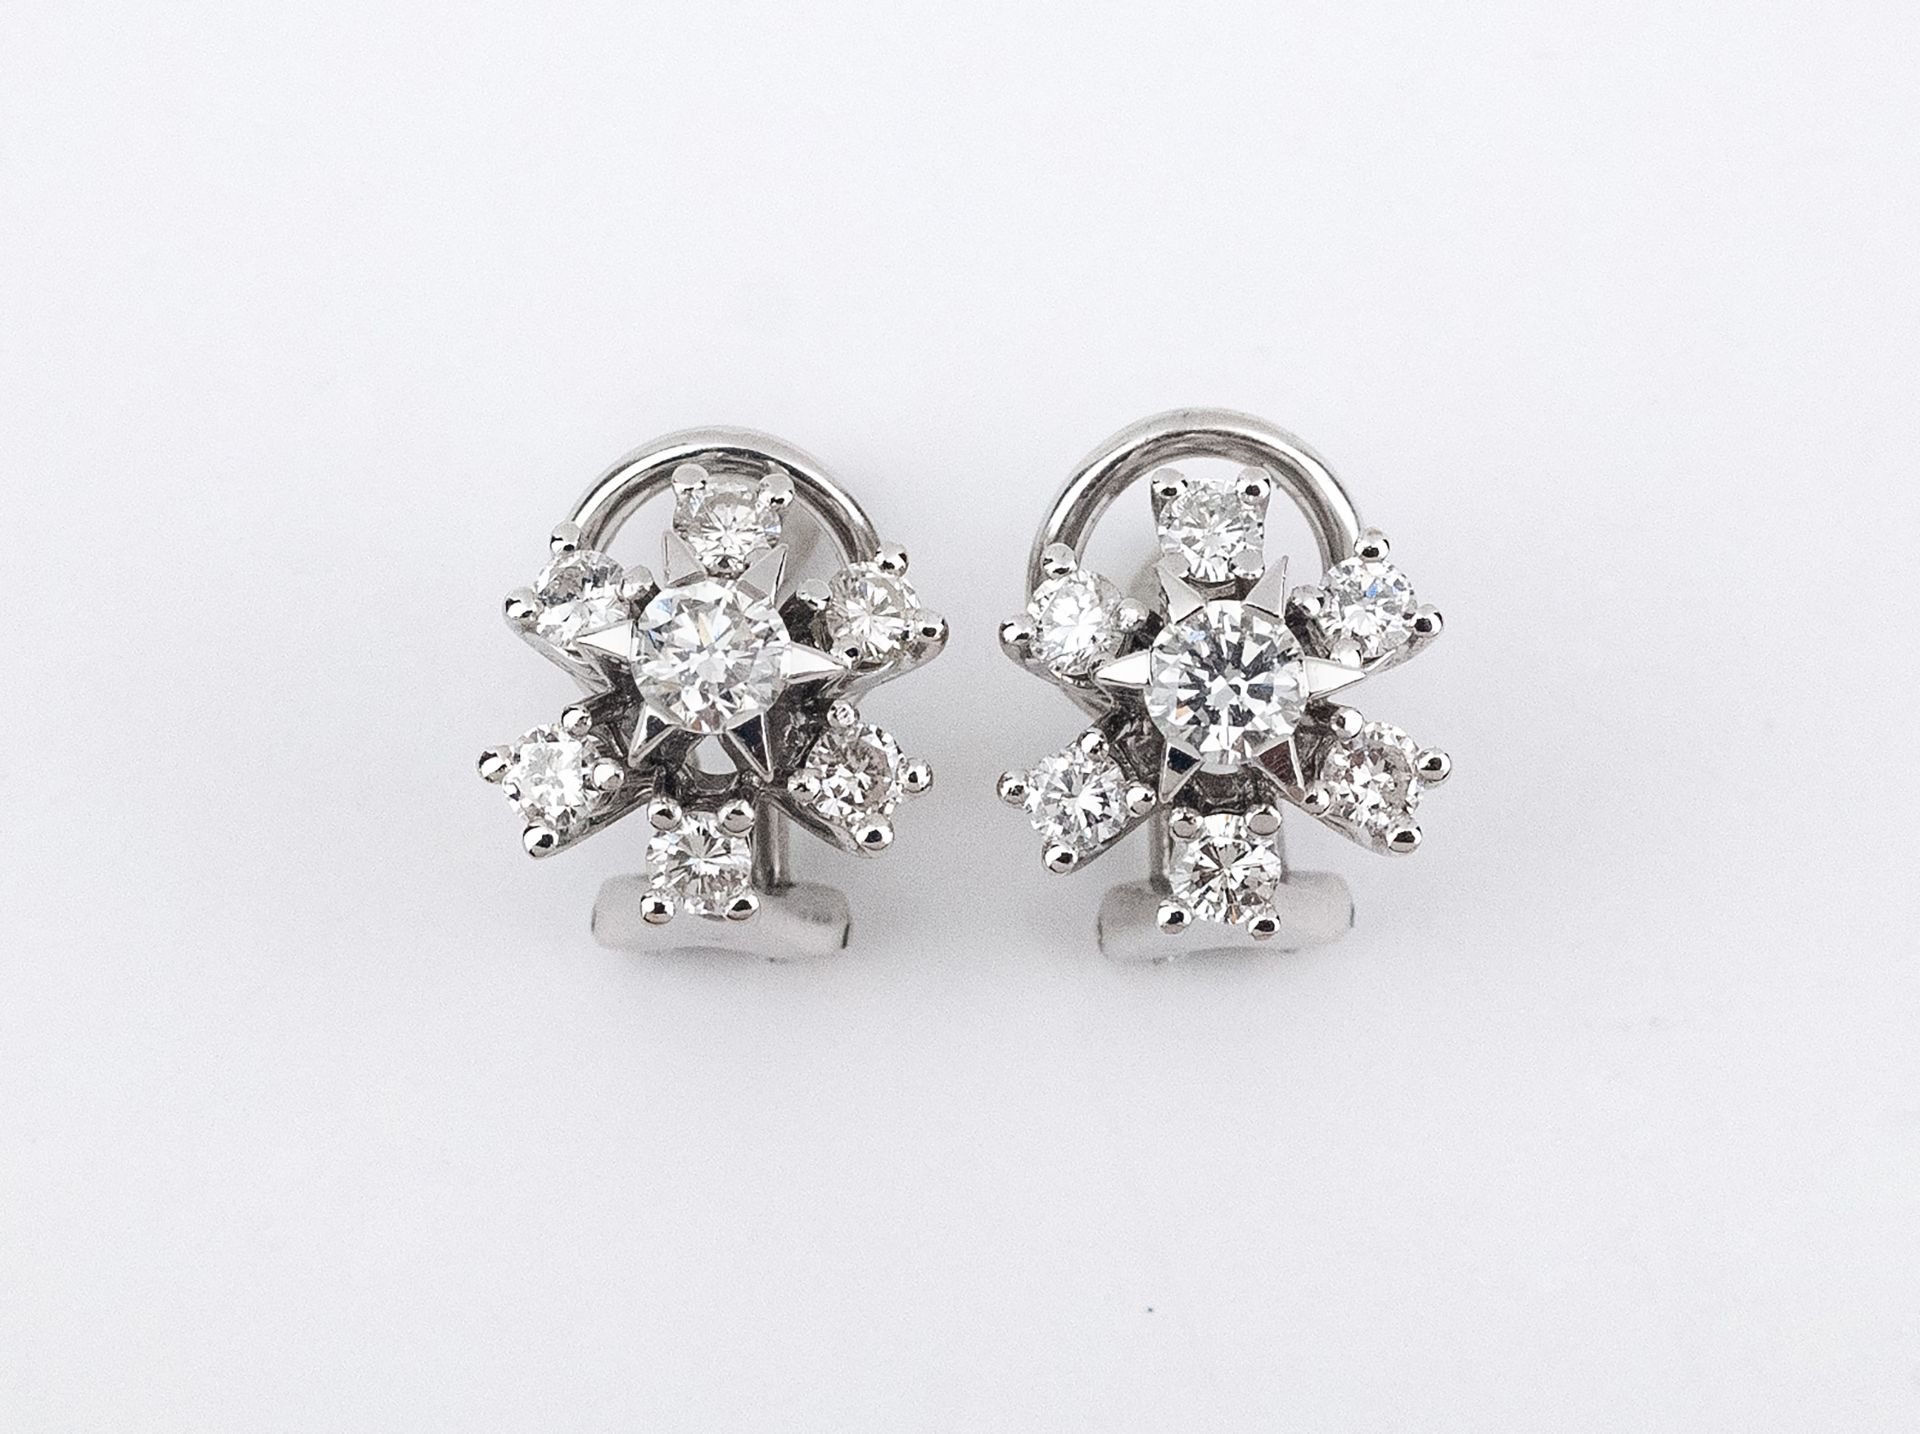 A pair of 18k. white gold and diamonds cluster earrings circa 1970-1980